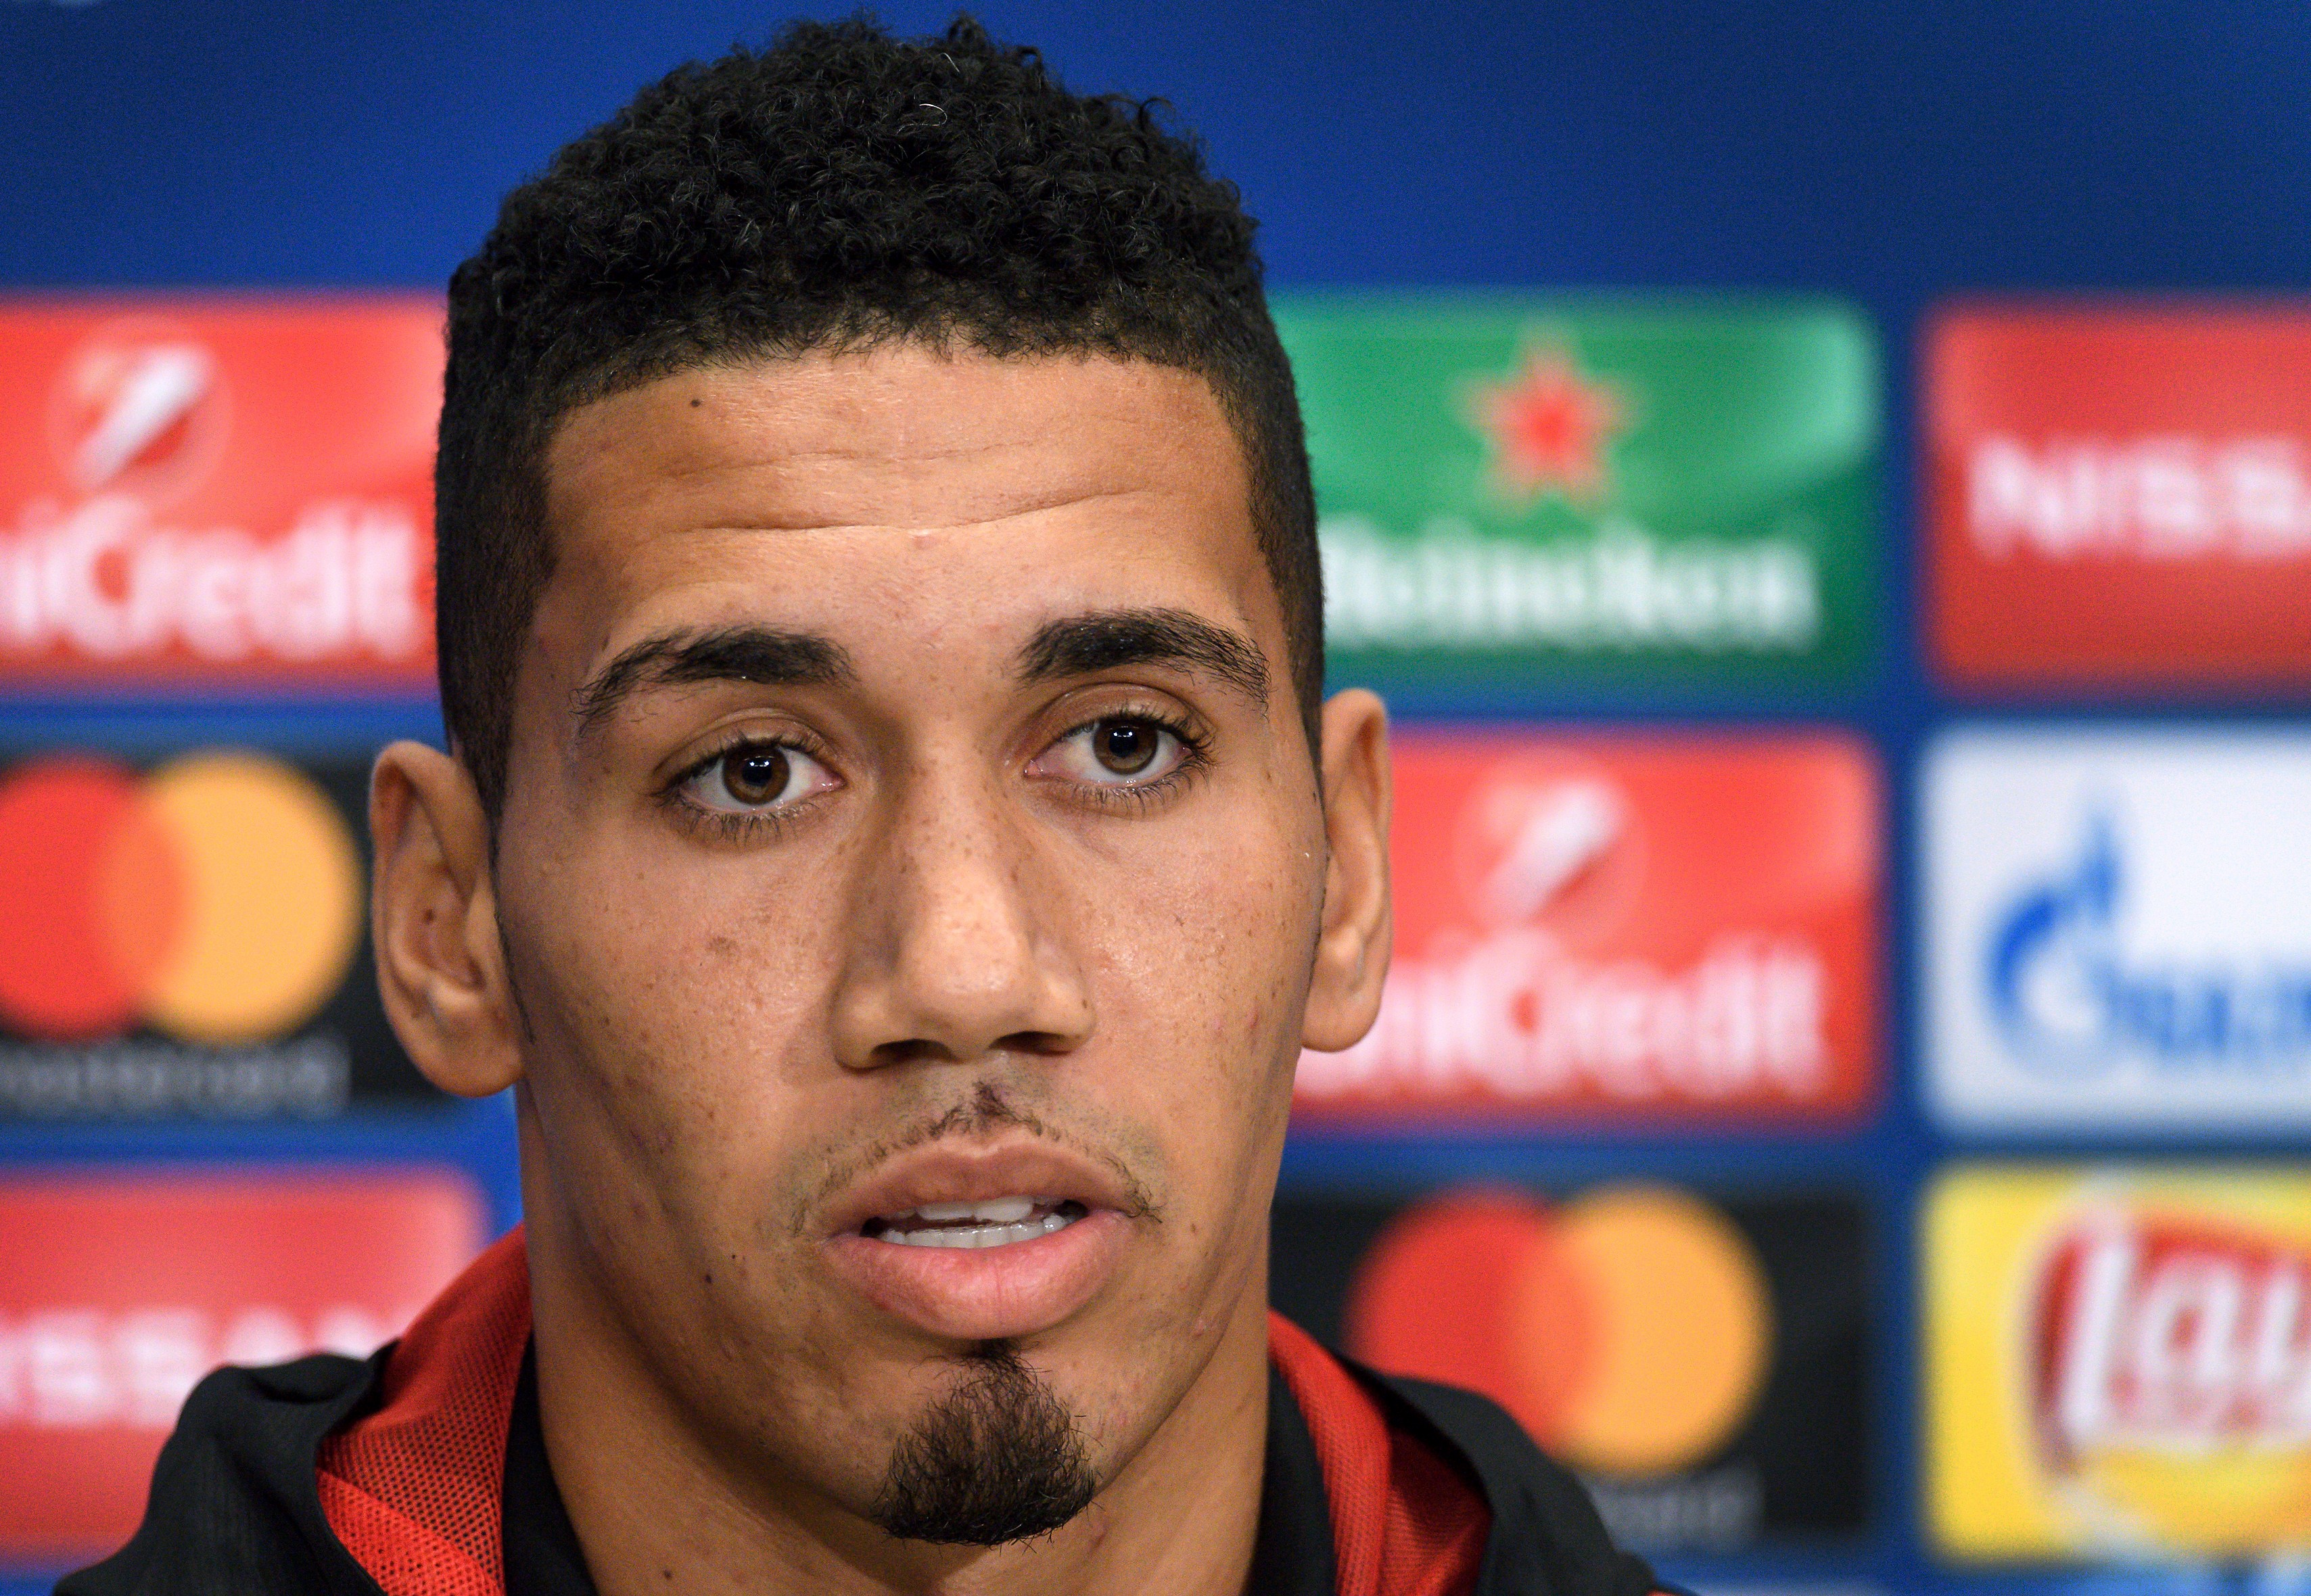 Manchester United's English defender Chris Smalling attends a press conference on the eve of the UEFA Champions League Group A football match between FC Basel and Manchester United on November 21, 2017 in Basel. / AFP PHOTO / Fabrice COFFRINI        (Photo credit should read FABRICE COFFRINI/AFP/Getty Images)